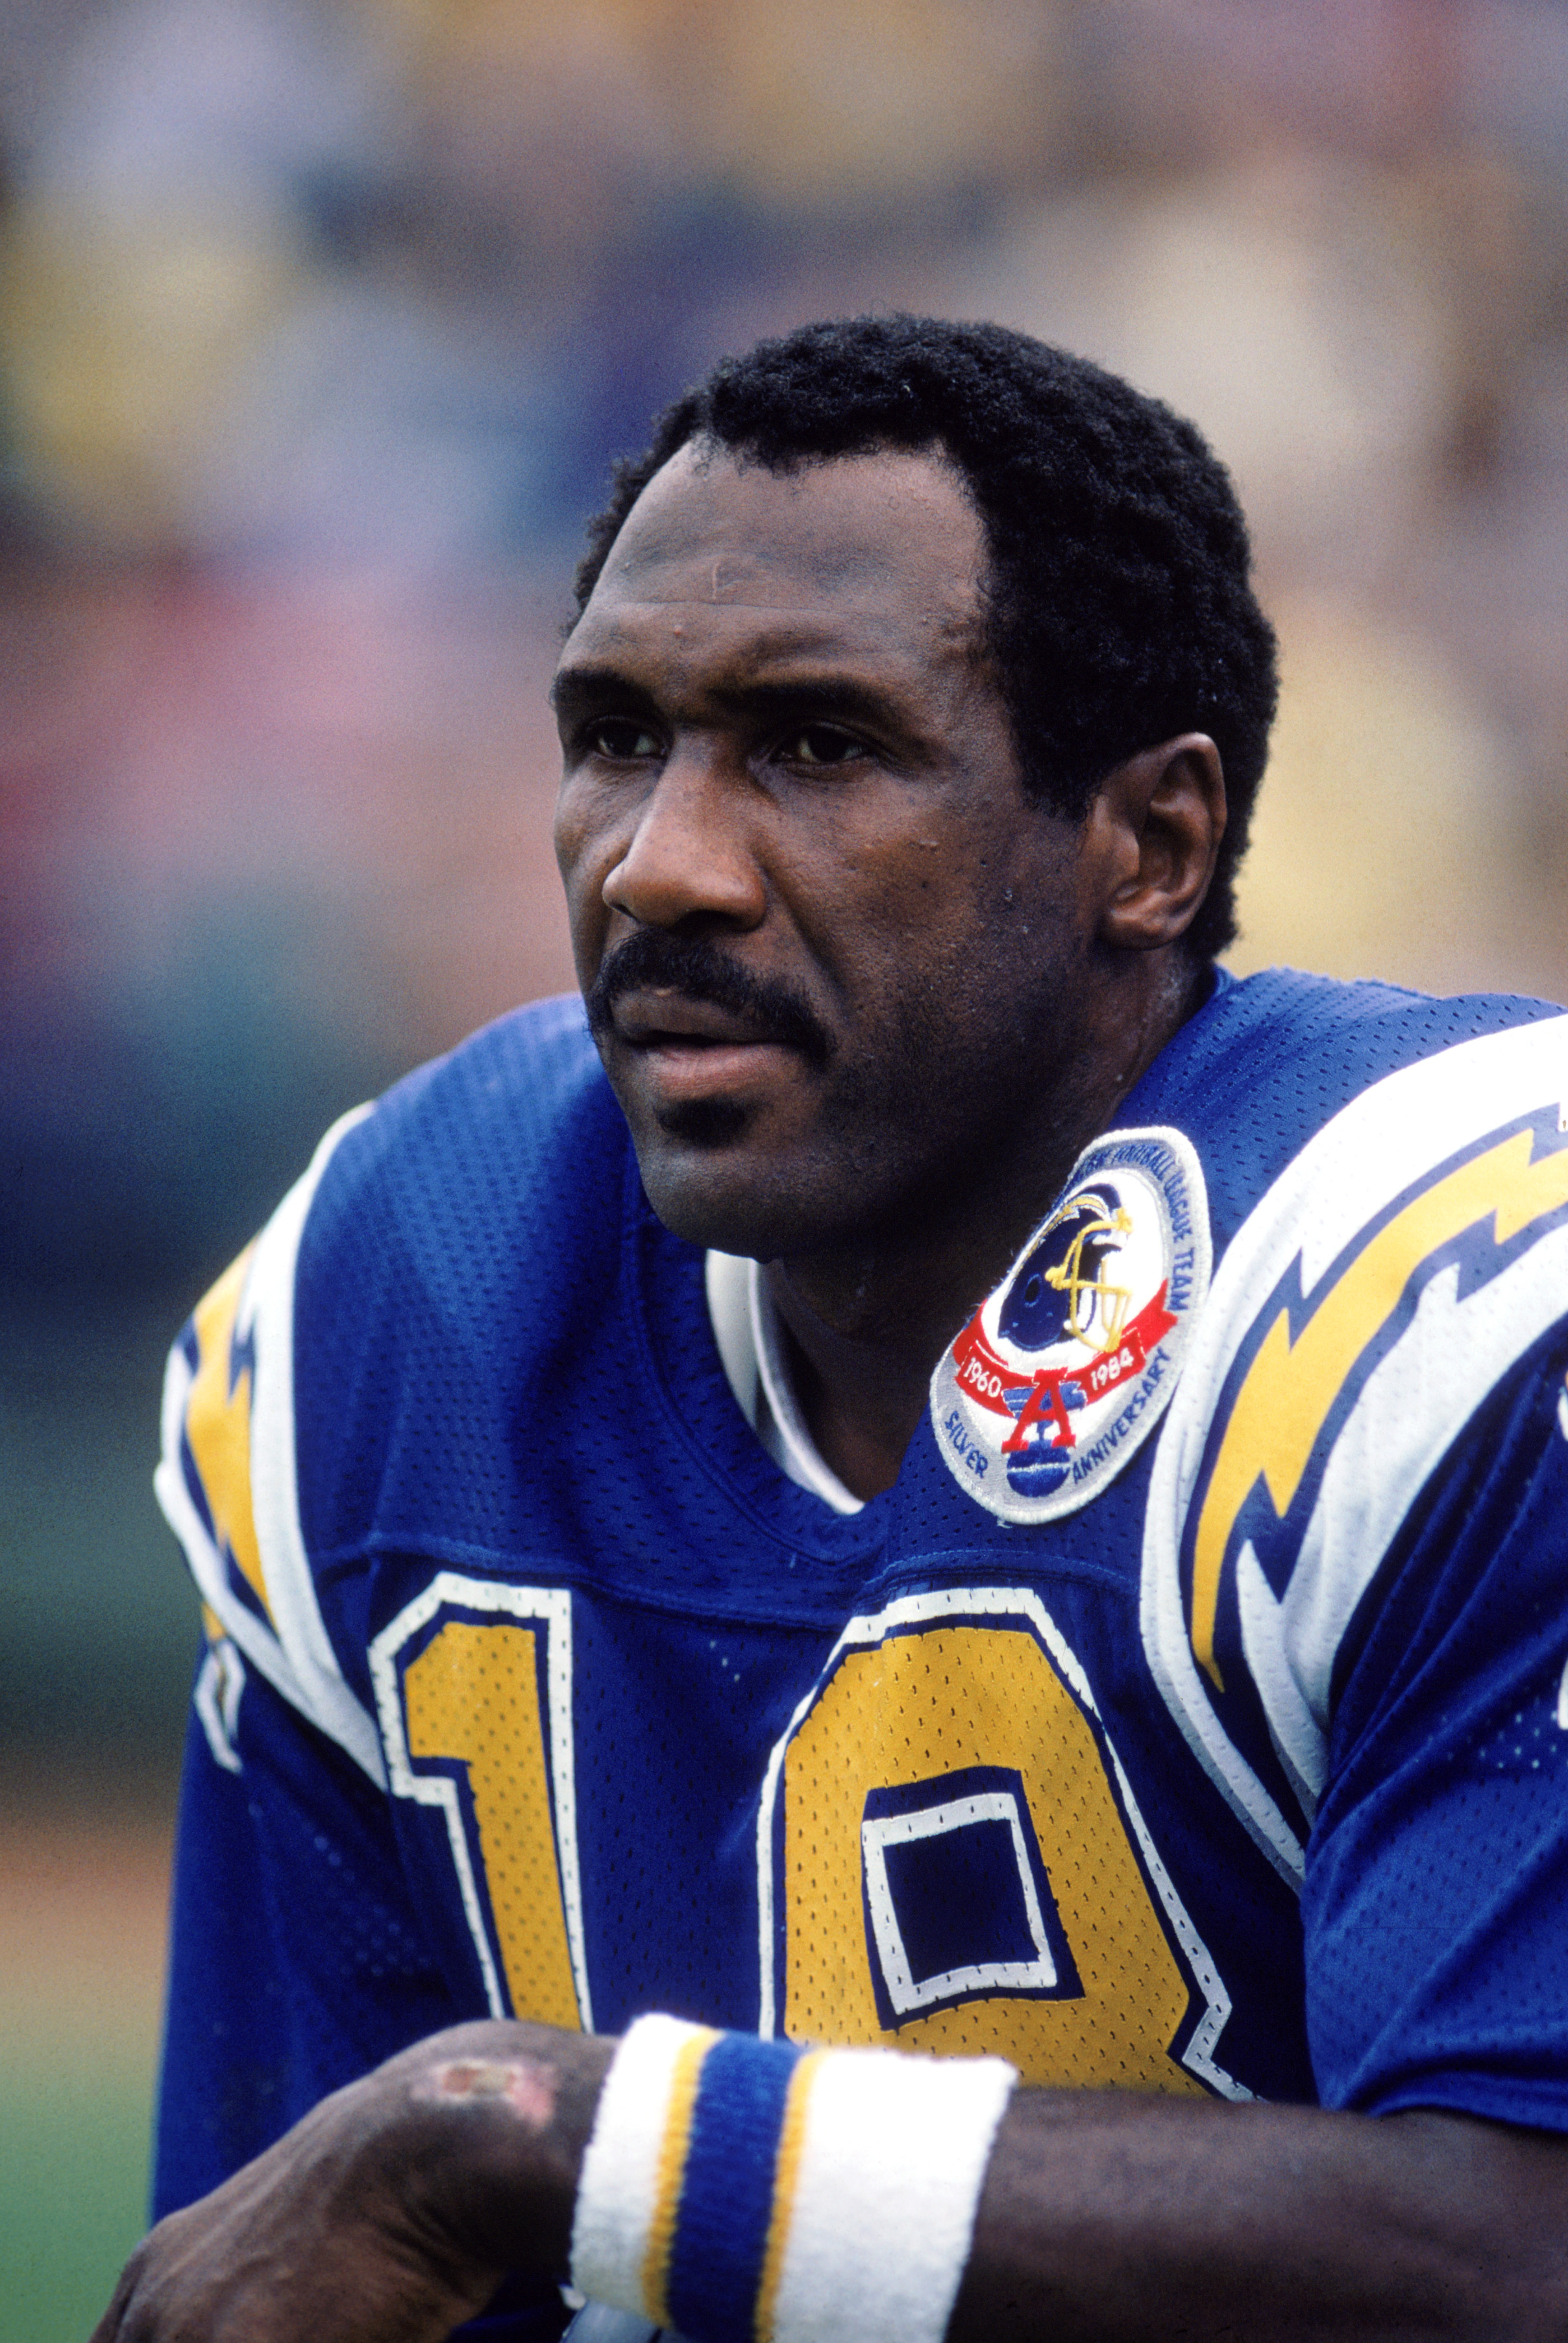 1984:  Wide receiver Charlie Joiner #18 of the San Diego Chargers focuses as he is about to set a NFL receiving record, moving ahead of Charley Taylor as the all-time receiving leader during a game in 1984.  (Photo by Tony Duffy/Getty Images)